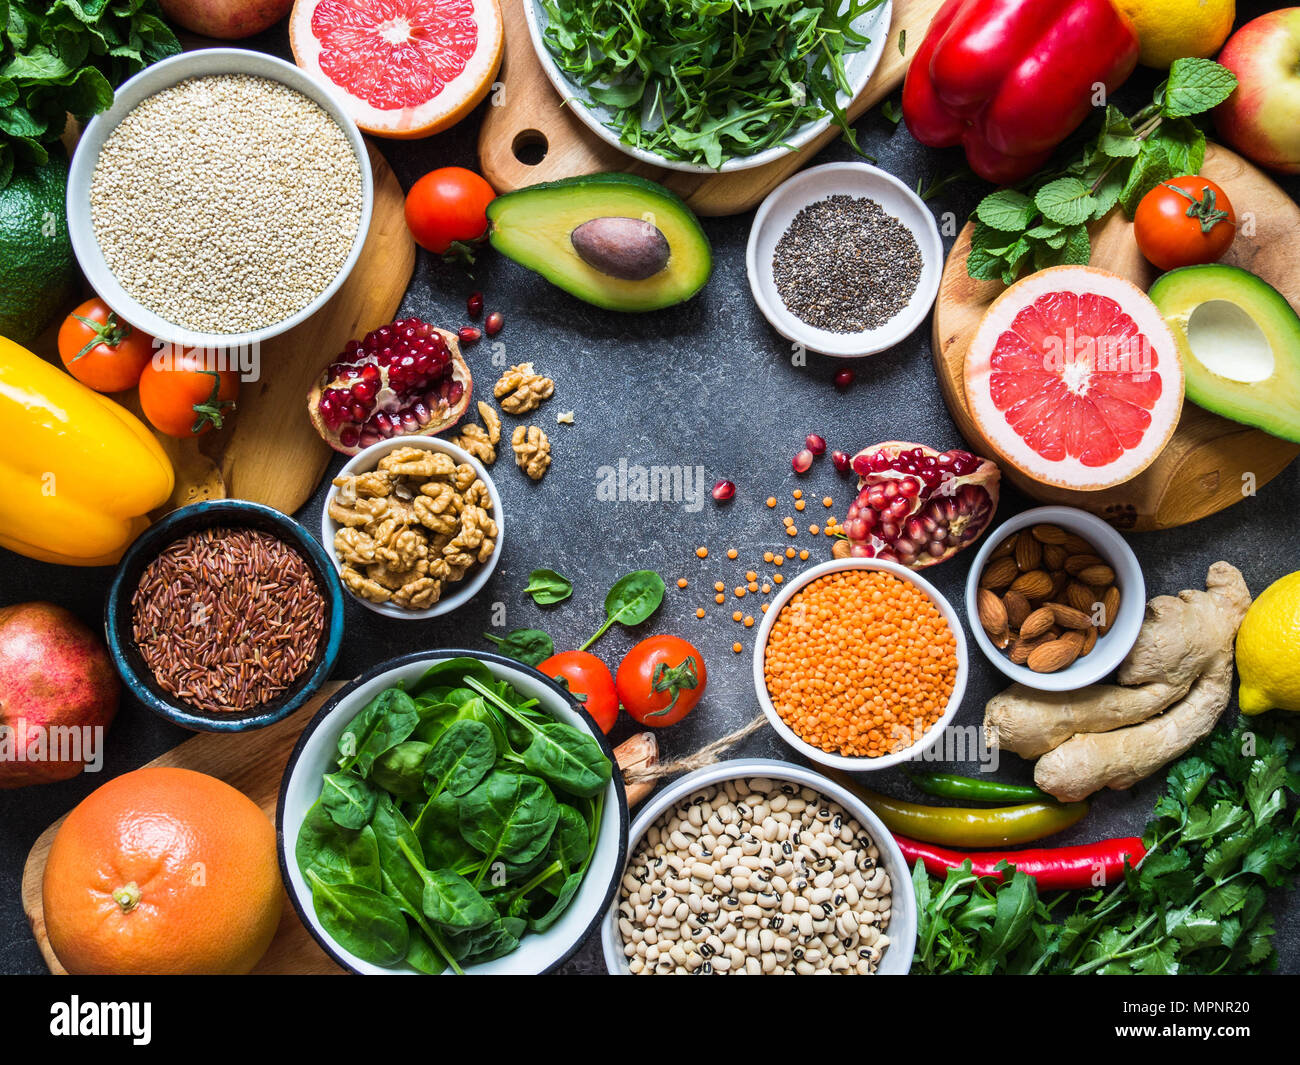 Fresh raw  ingredients for healthy cooking.  Vegetables, fruit, seeds, cereals, beans, spices, superfoods, herbs. Clean food. Top view. Stock Photo